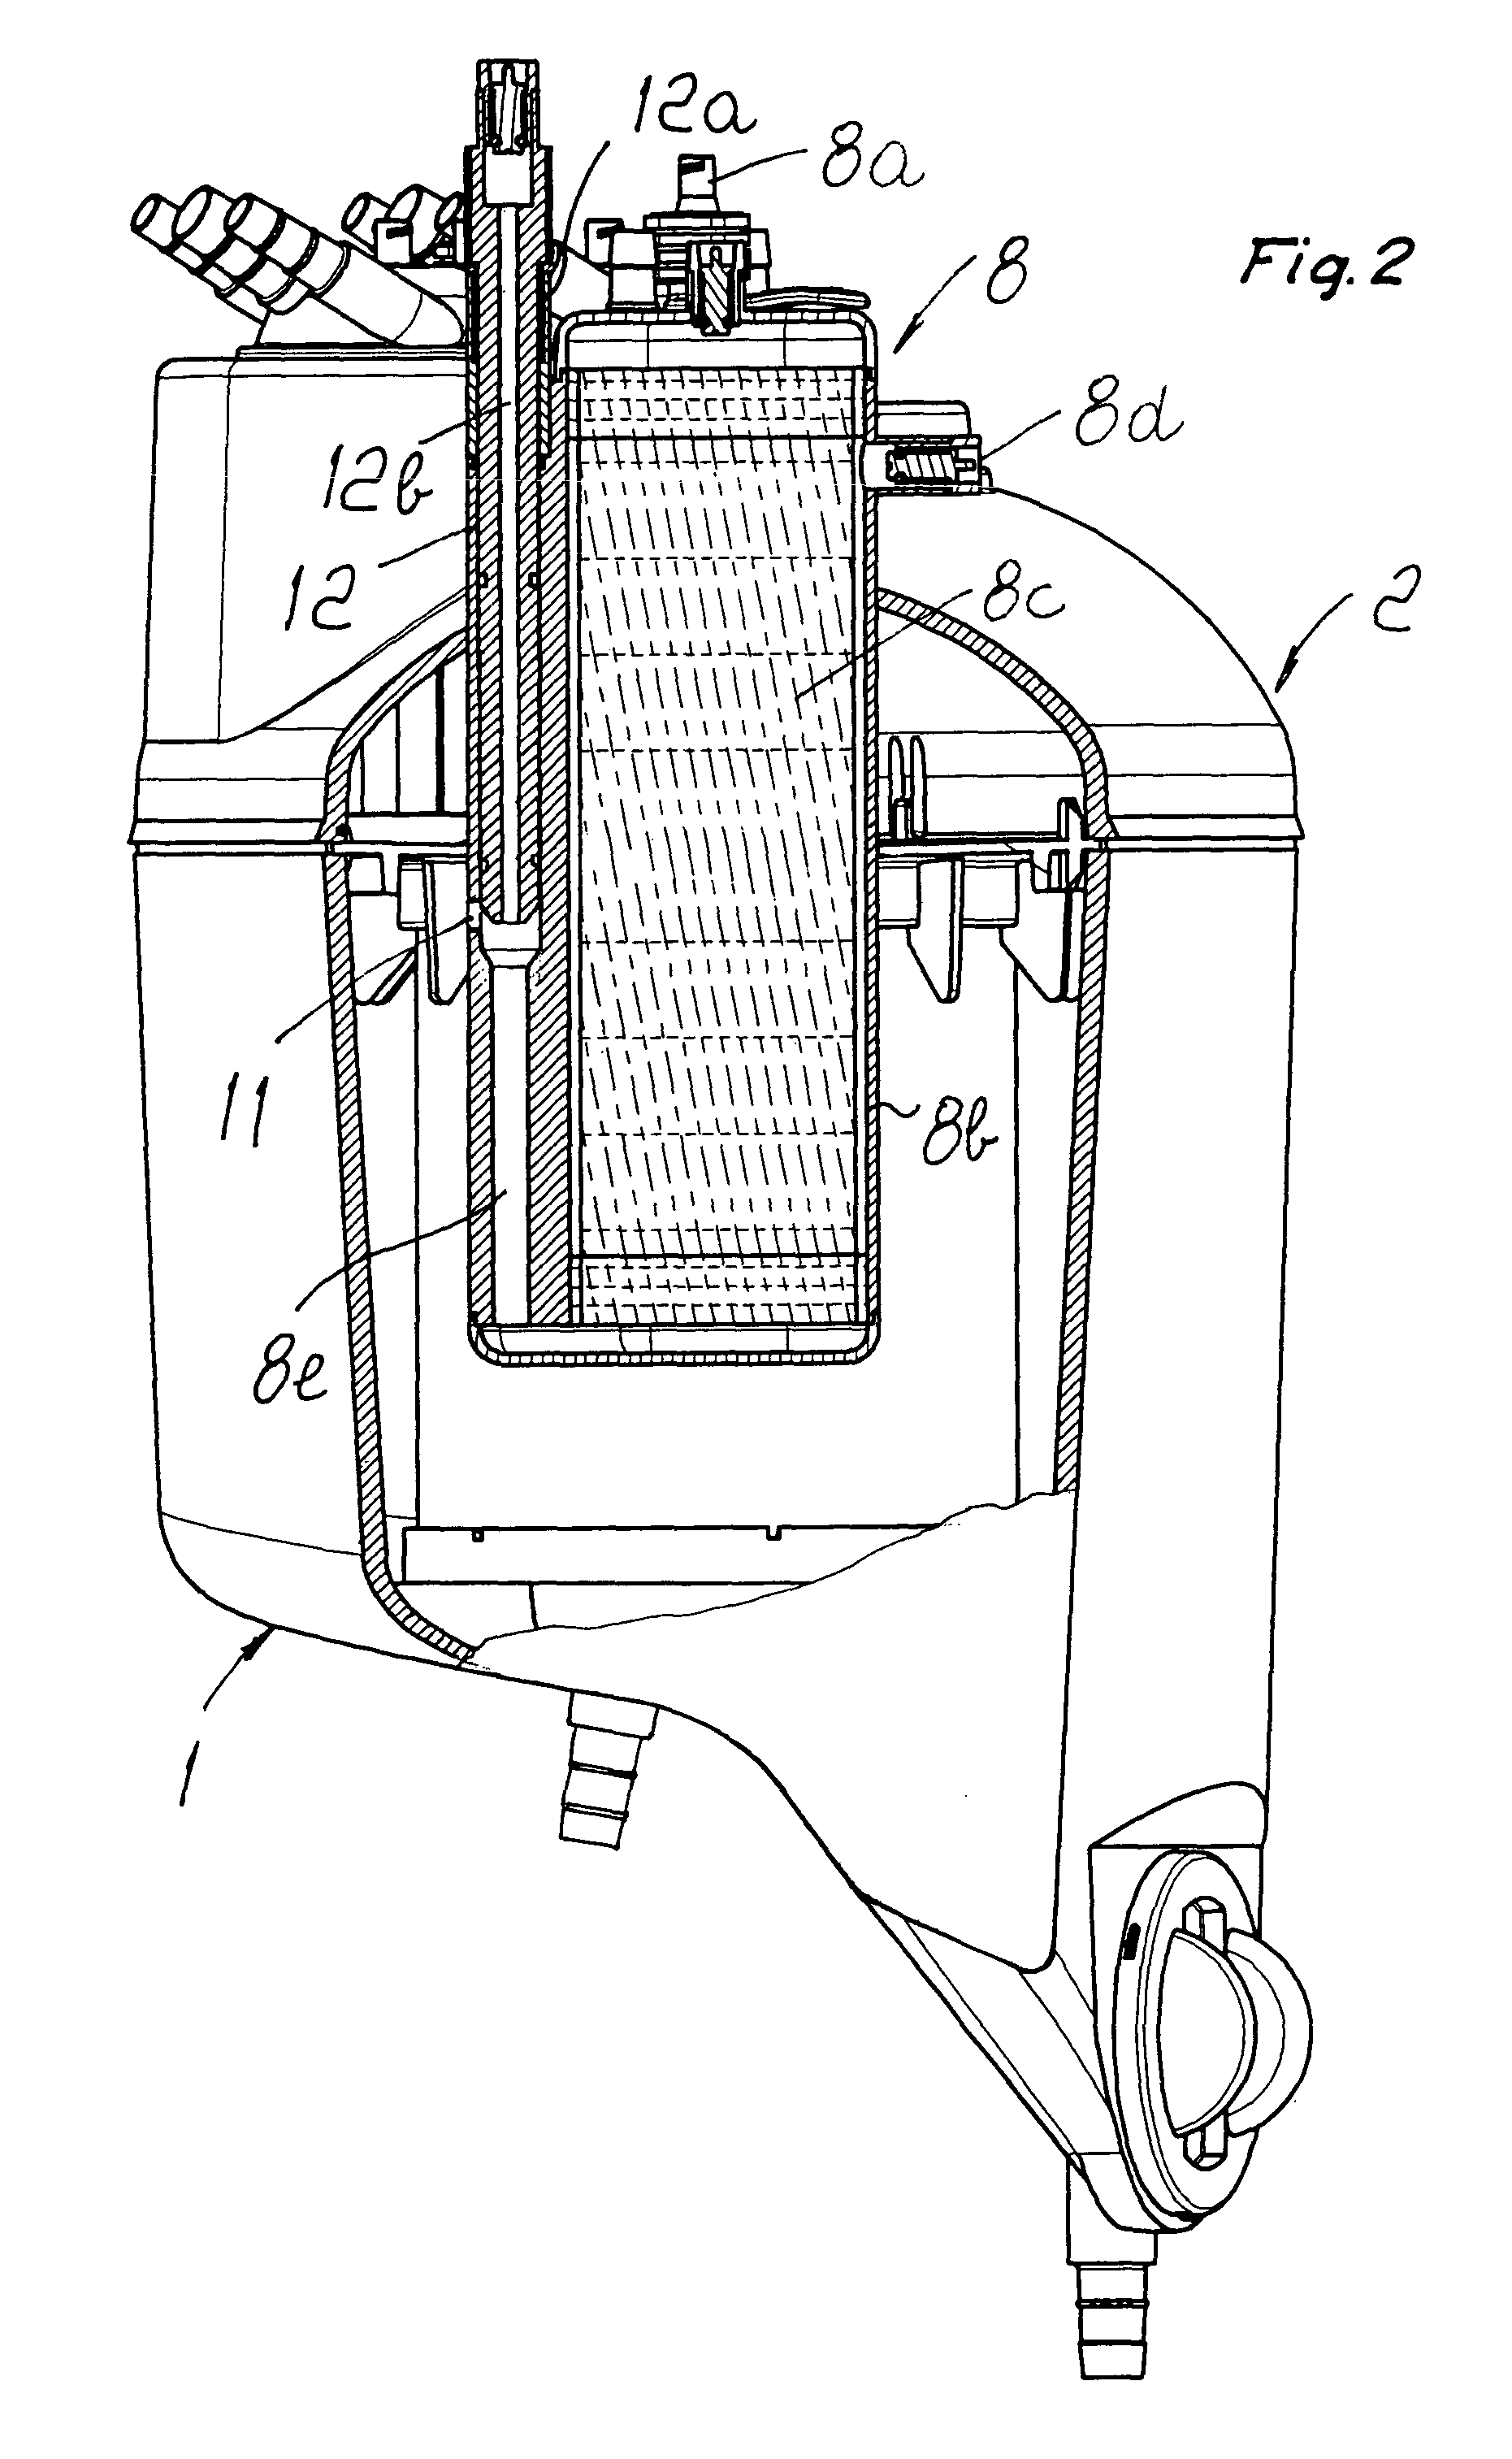 Hemoconcentrator in extracorporeal blood circuit